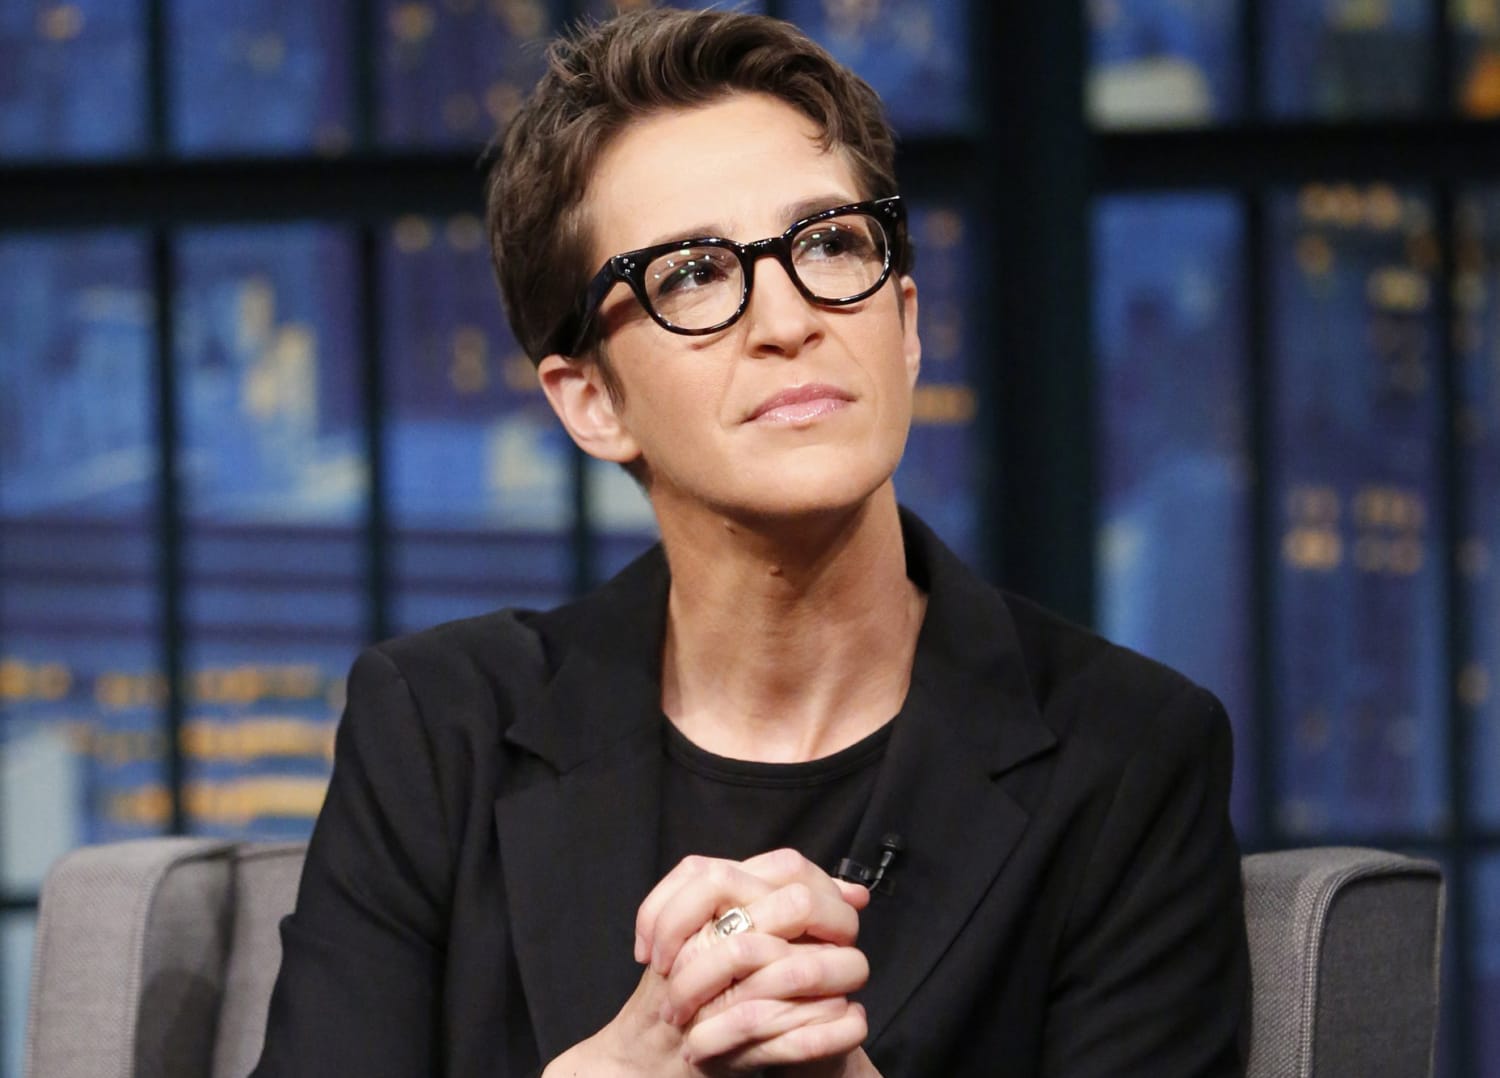 Maddow said she was hesitant to believe anything was wrong, but at her part...